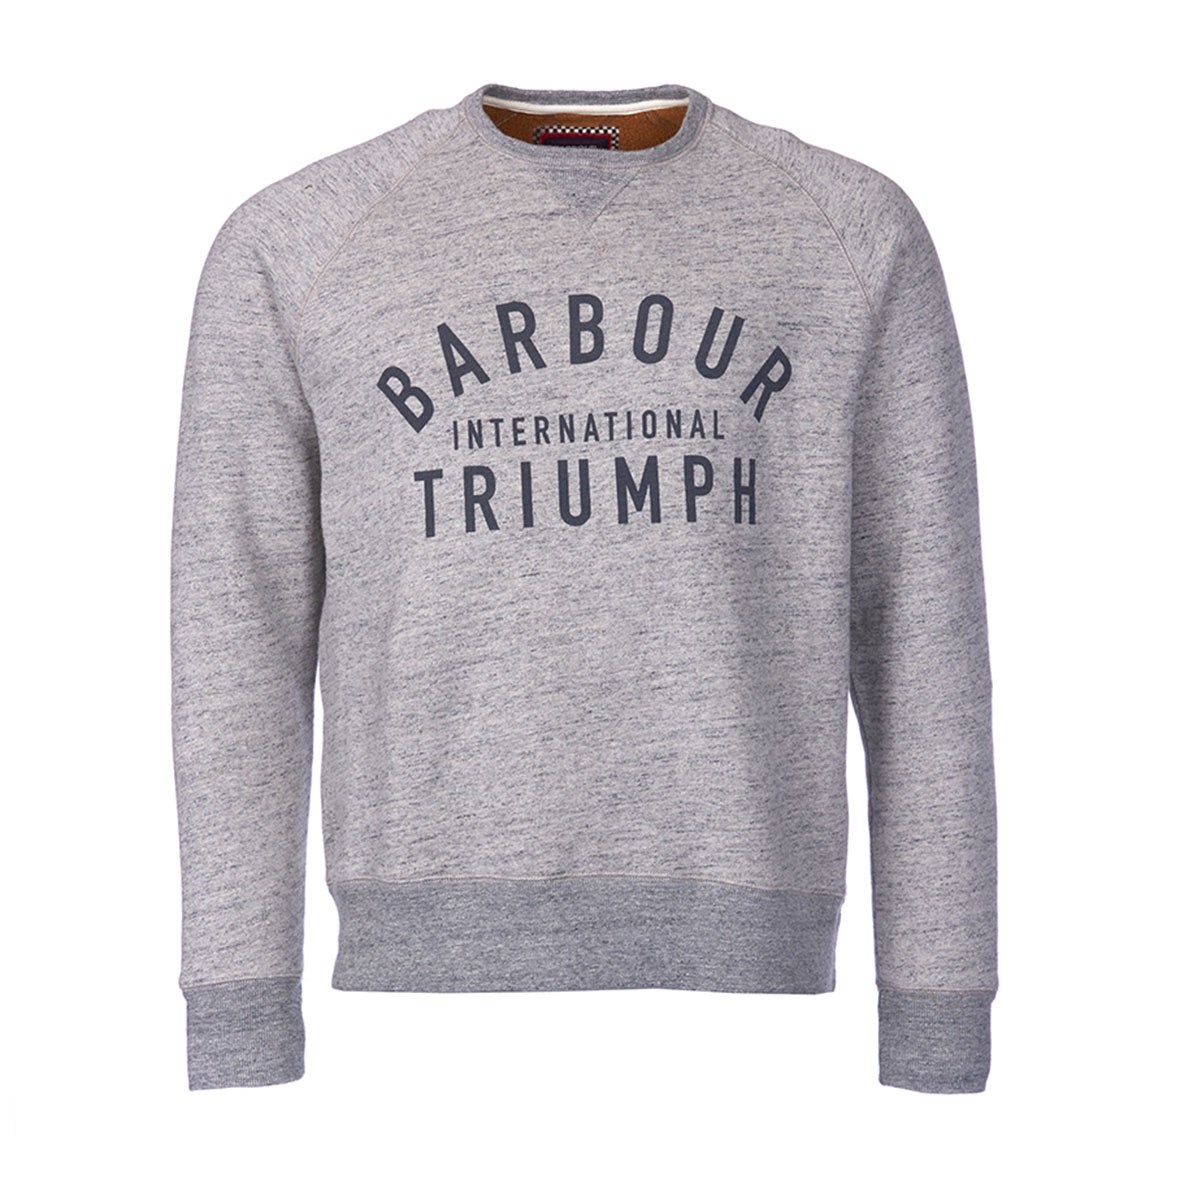 Barbour Summer Styles - Sporting Life Blog